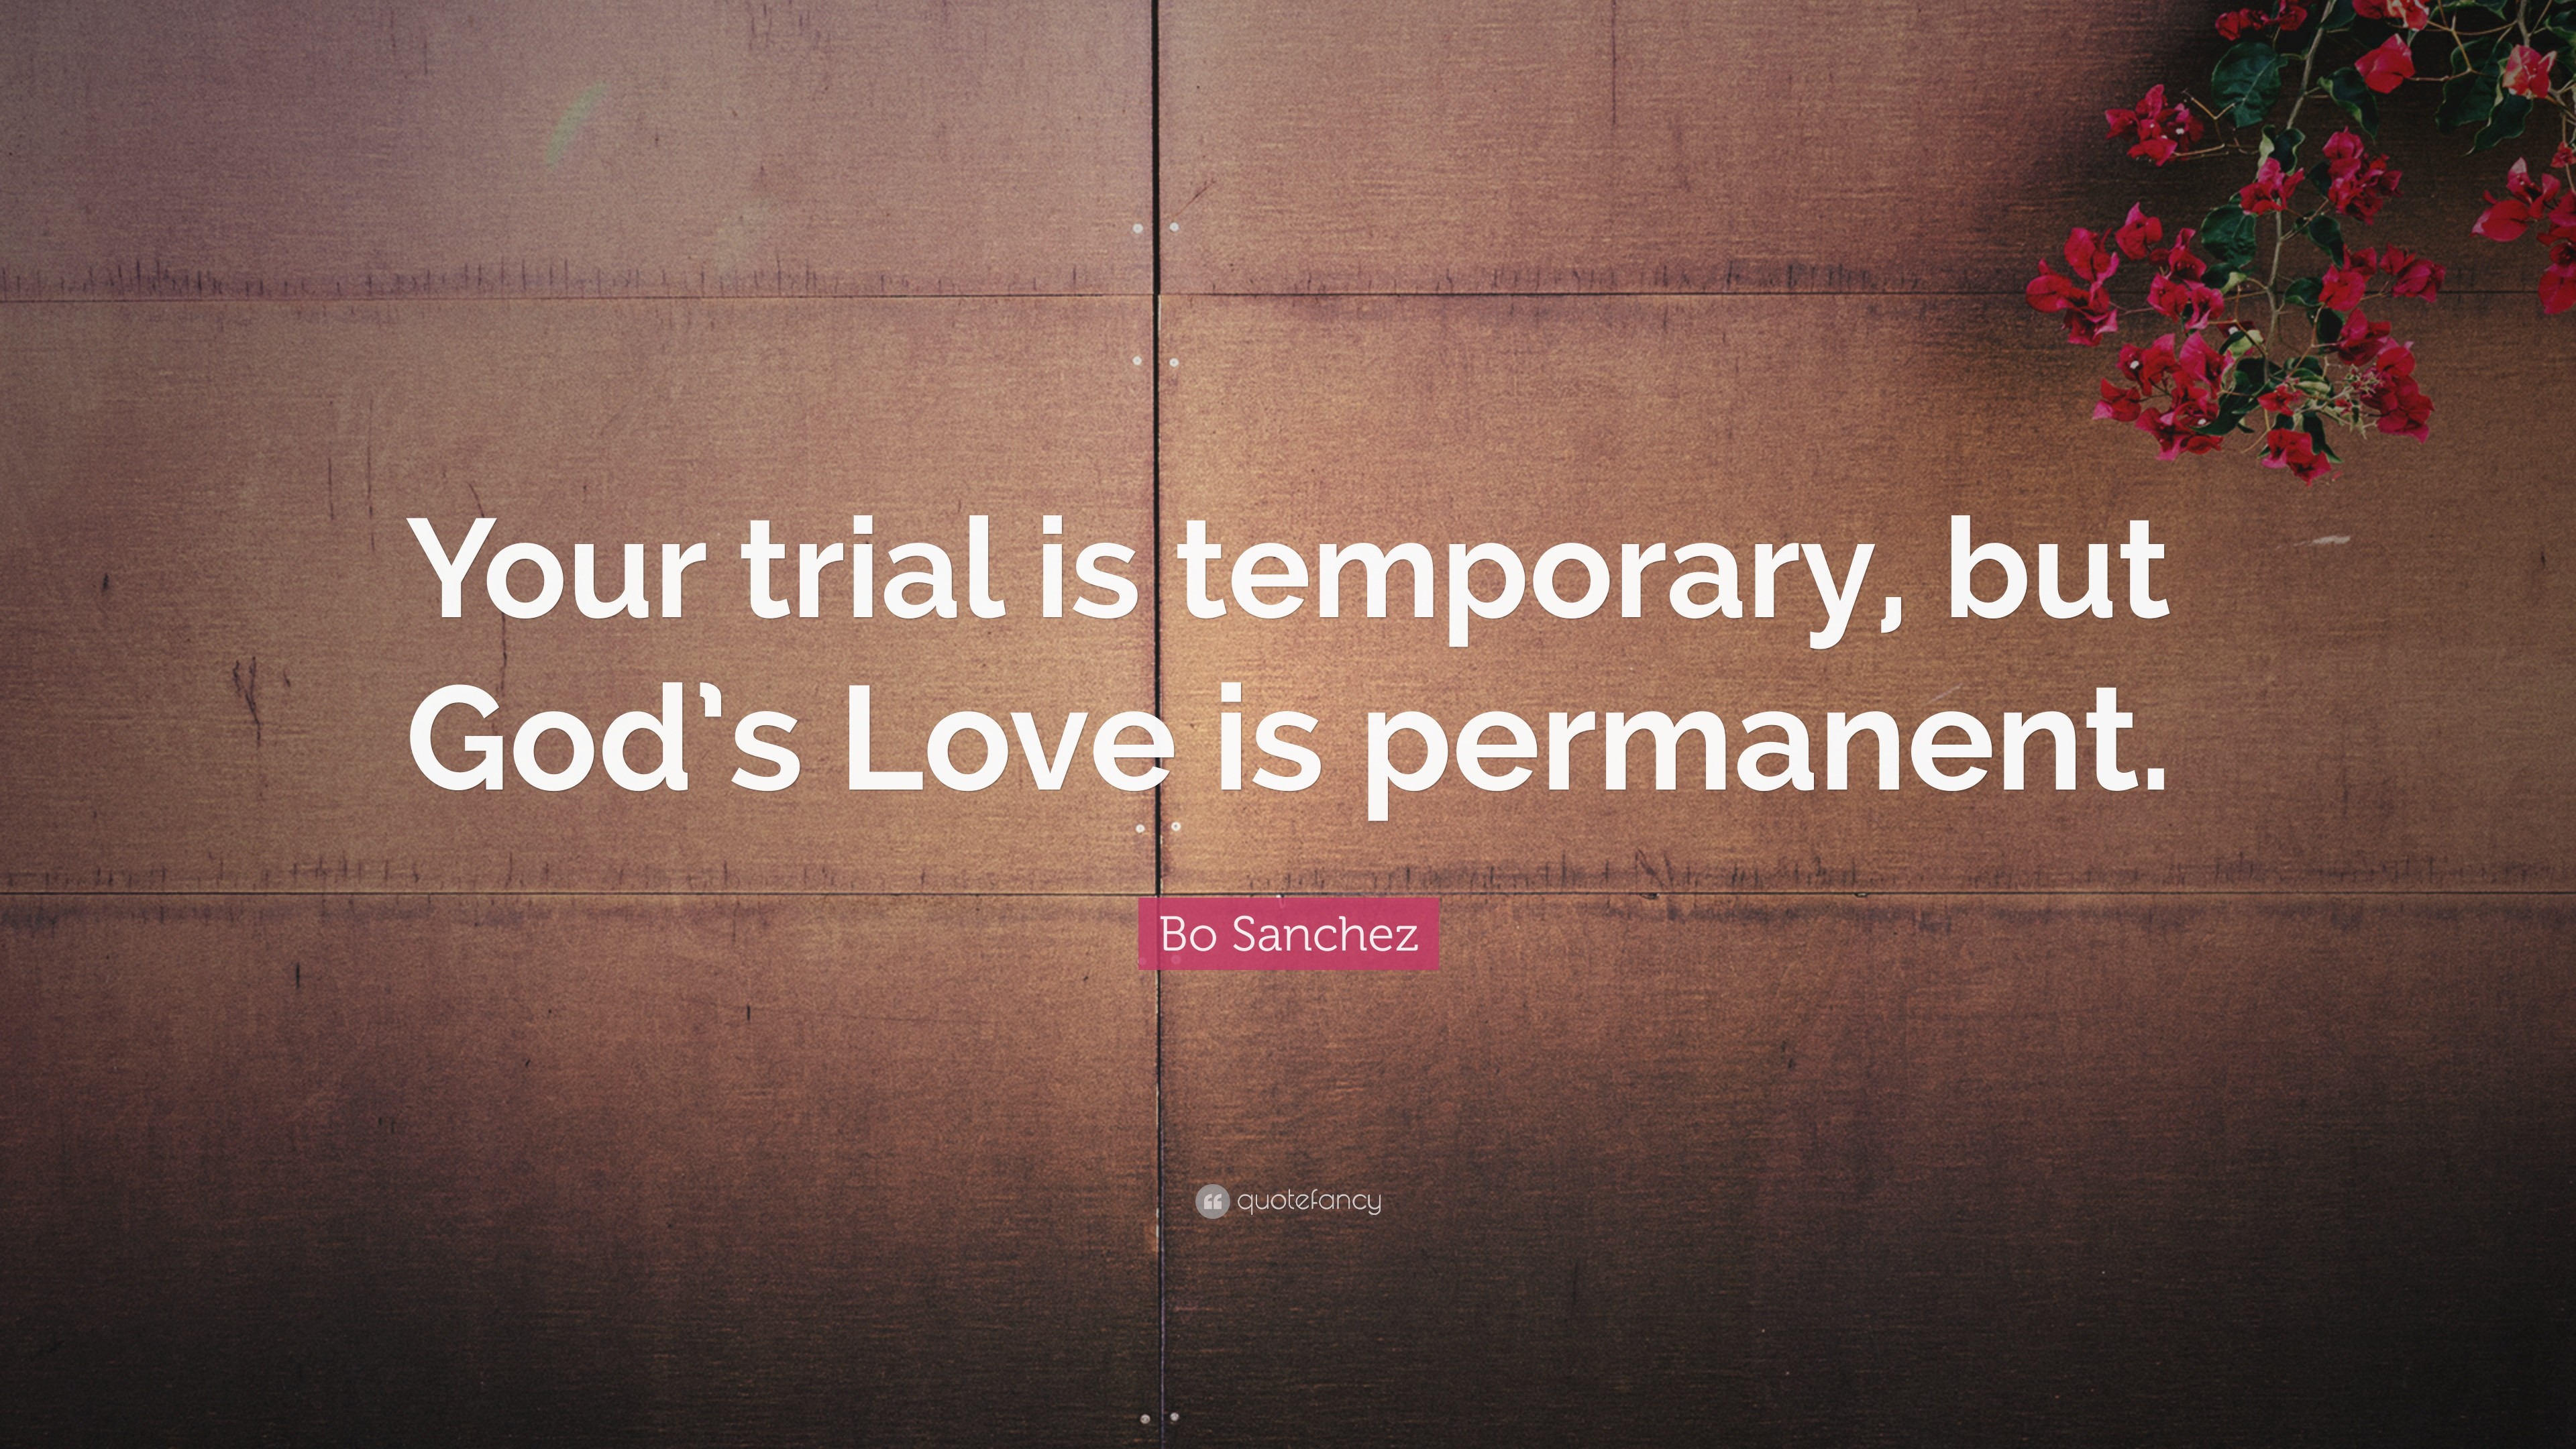 3840x2160 Bo Sanchez Quote: “Your trial is temporary, but God's Love is permanent.